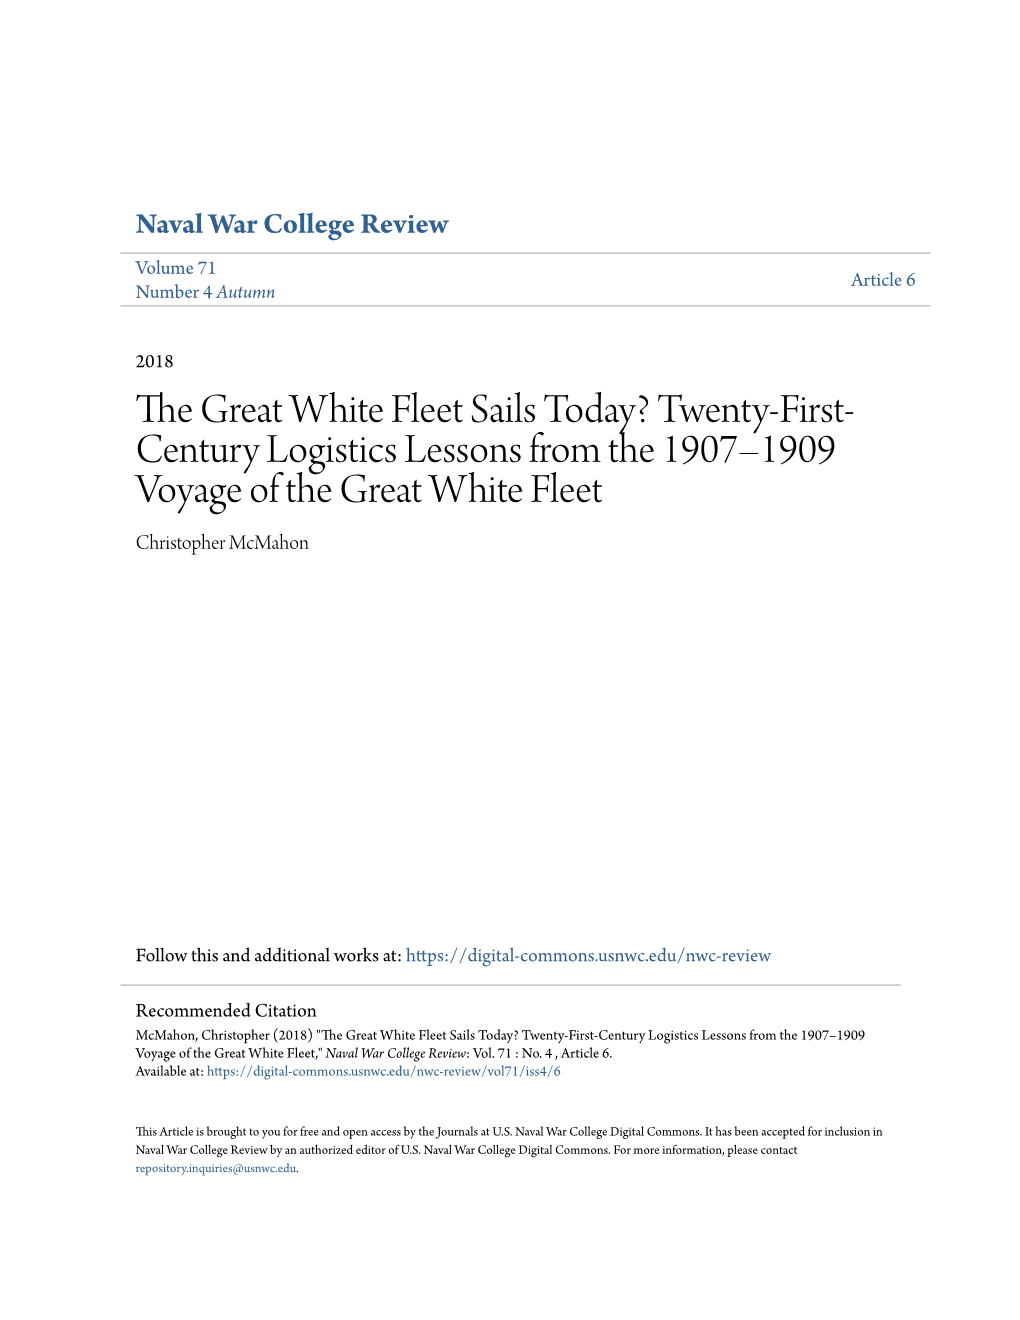 The Great White Fleet Sails Today? Twenty-First- Century Logistics Lessons from the 1907–1909 Voyage of the Great White Fleet Christopher Mcmahon